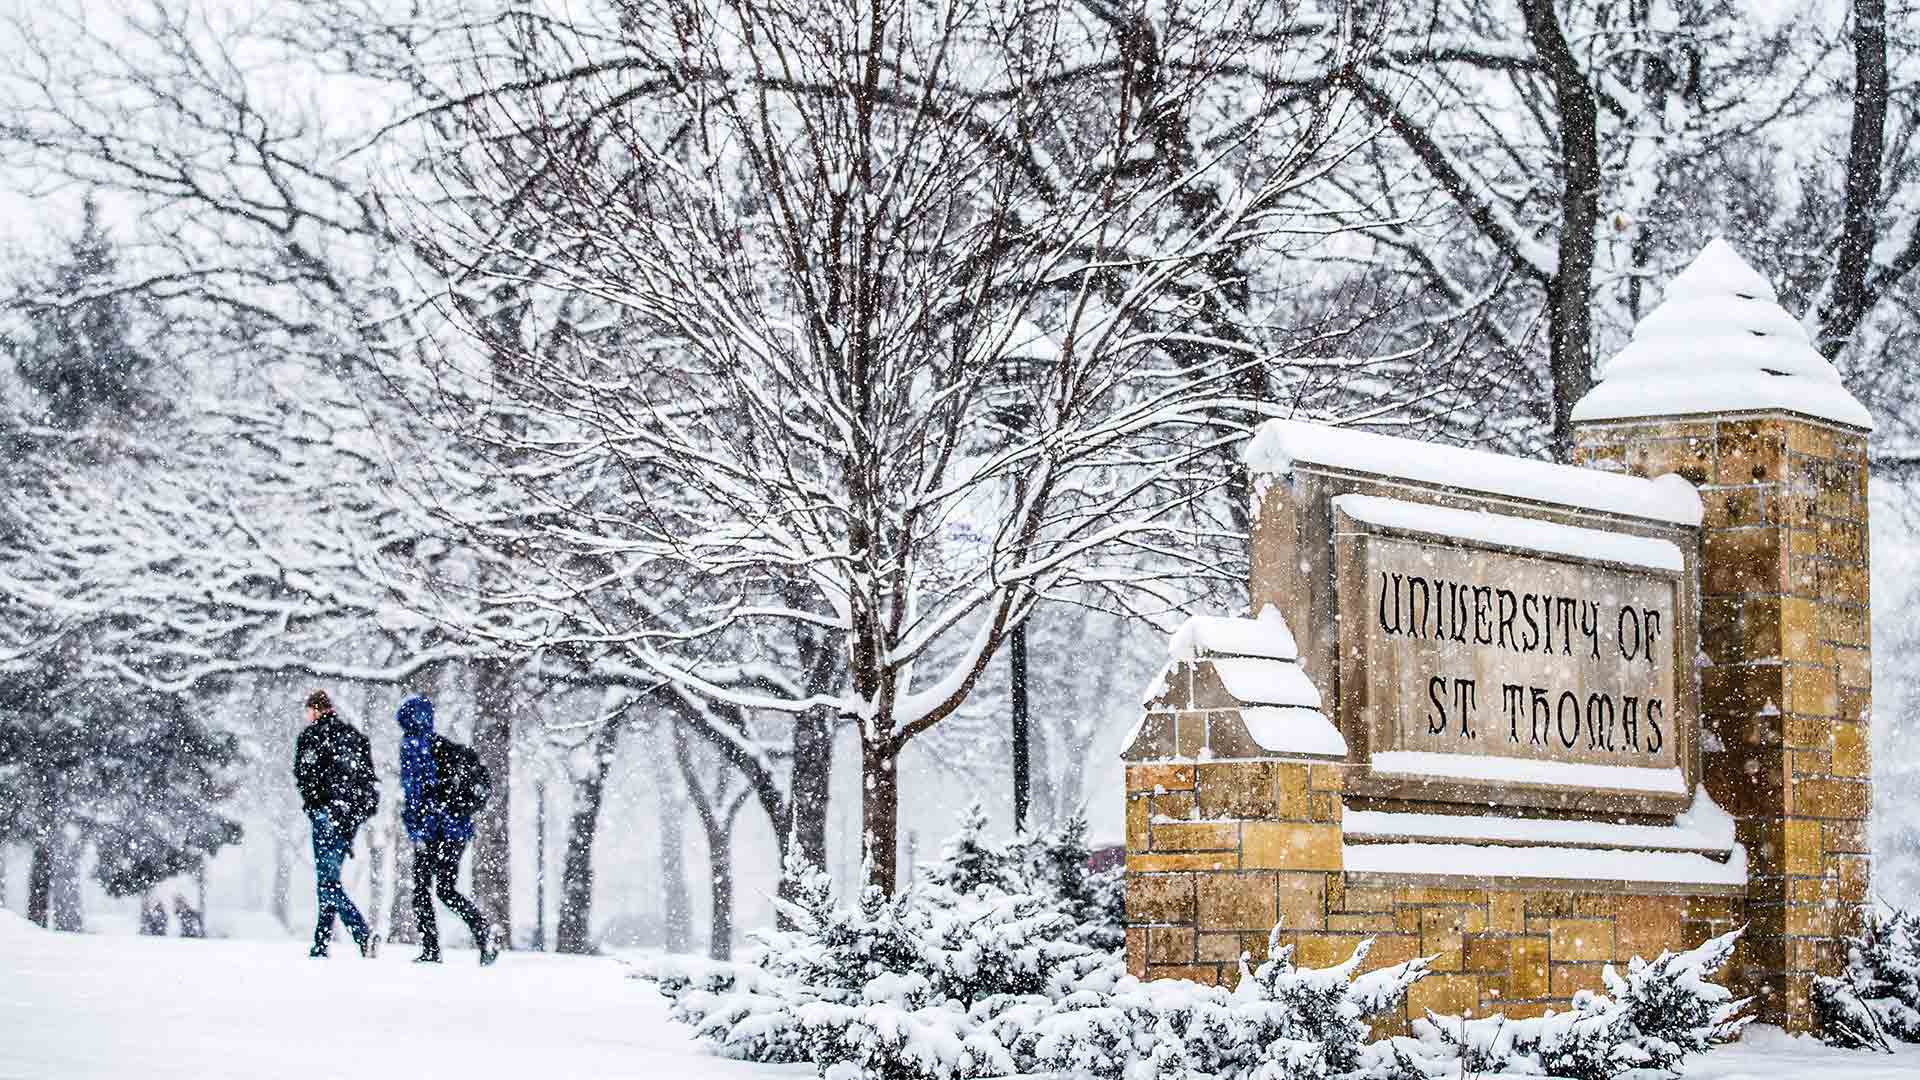 Stone University of St. Thomas sign covered in falling snow.